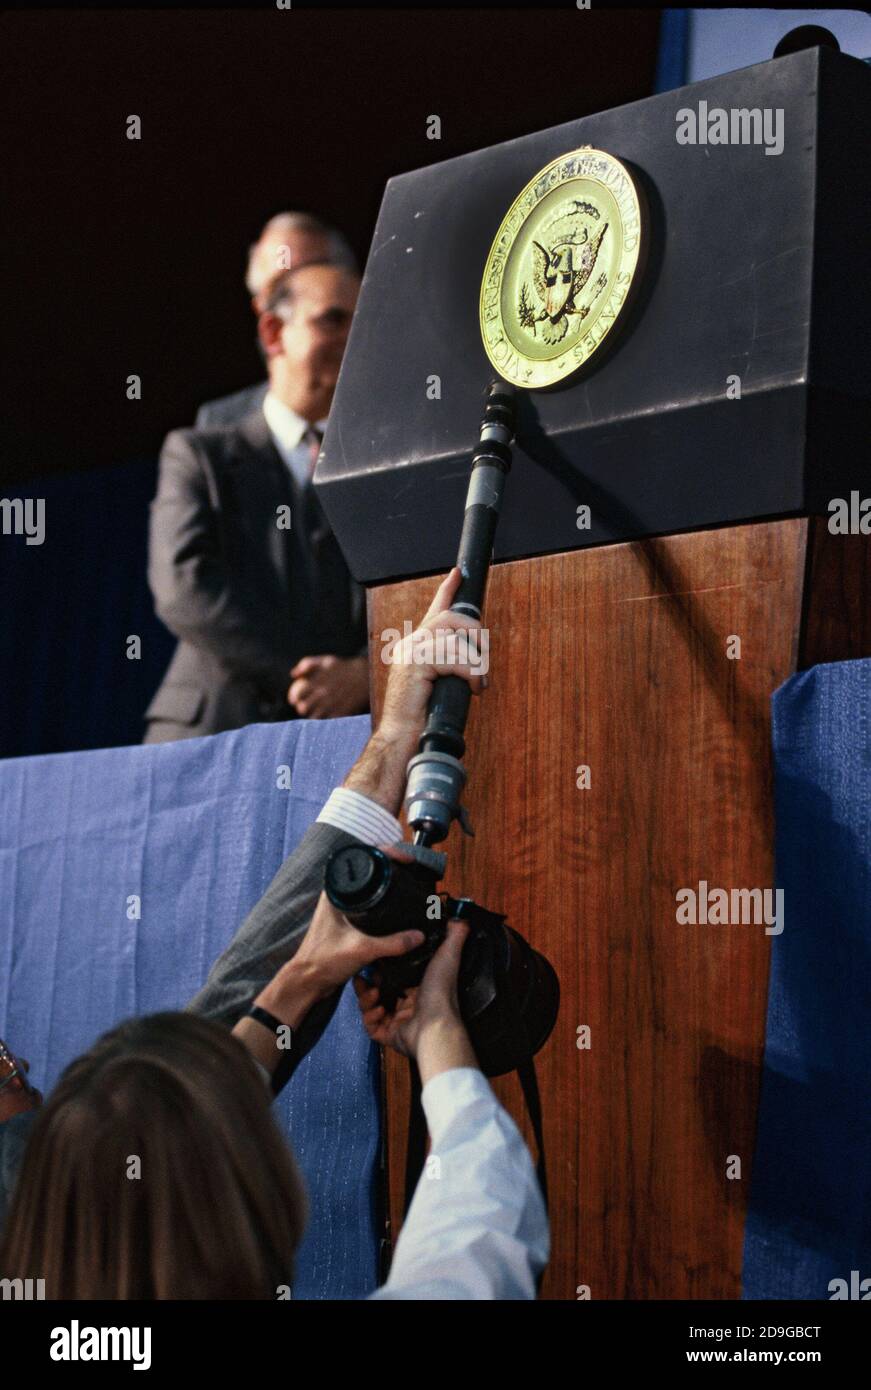 Two Bush 41 advance persons use a photographers 300MM f 2.8 lens and monopod (probably mine) to straighten the Vice Presidetntial seal on the podium before VP George W. Bush speaks in November 1988. Photo by Dennis Brack bb73 Stock Photo